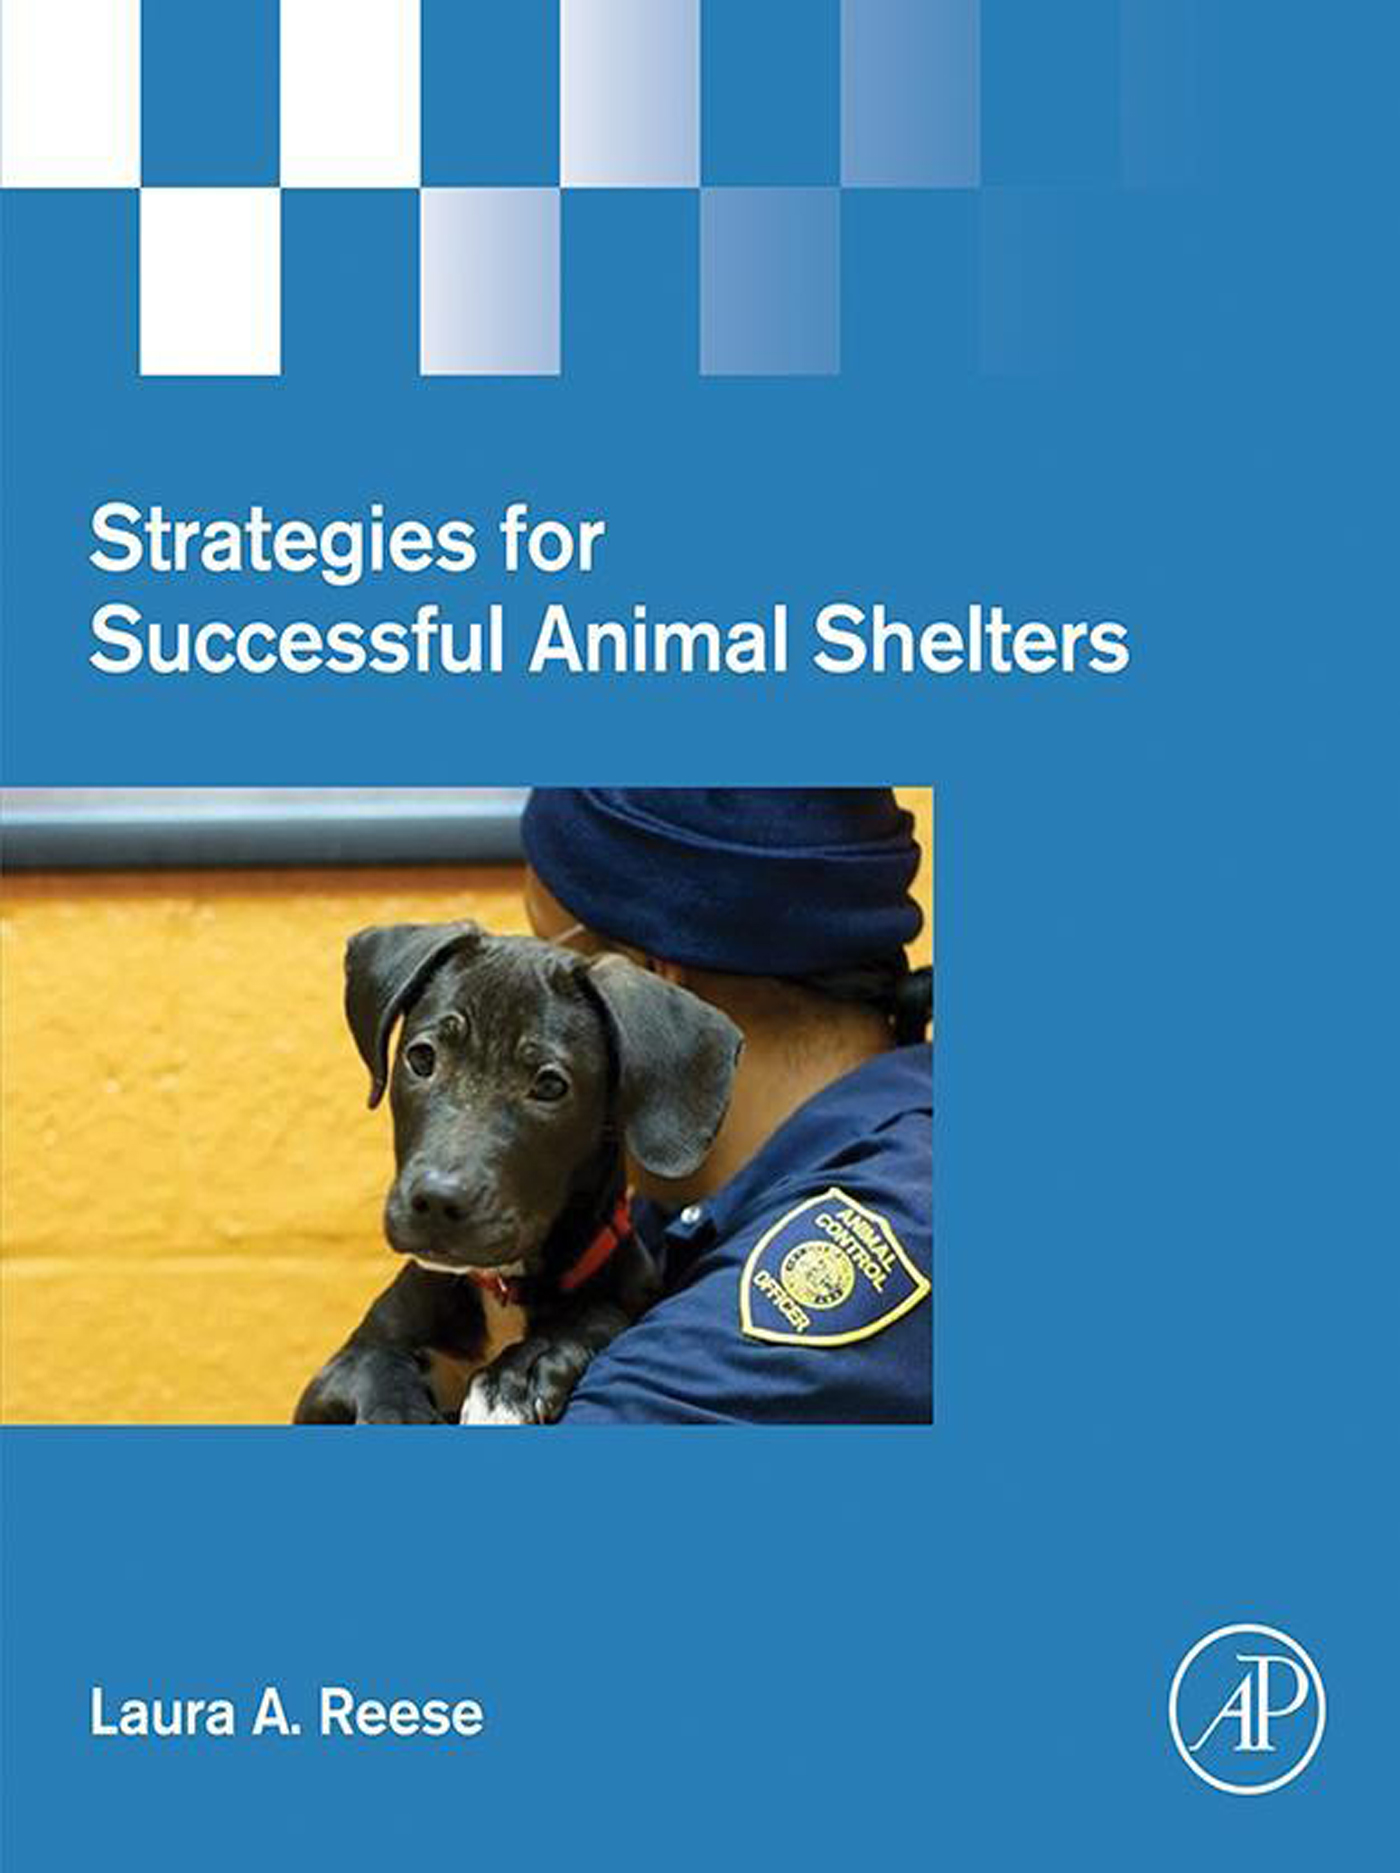 Strategies for Successful Animal Shelters